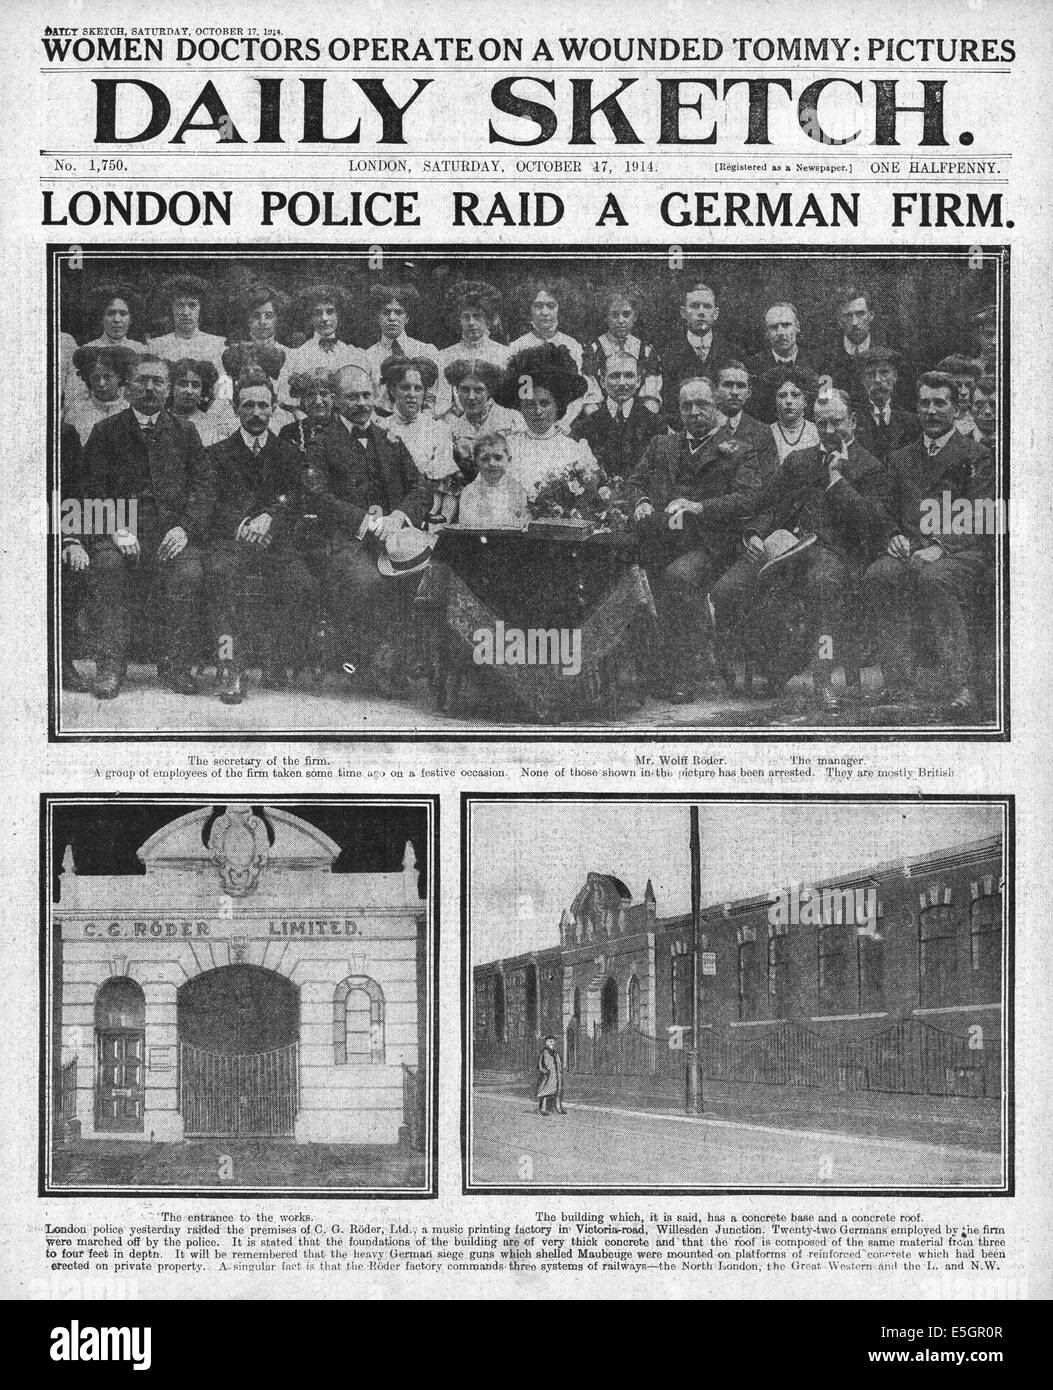 1915 Daily Sketch front page reporting London police raid the premisis of German firm C.G Röder Ltd in Willesden, London Stock Photo